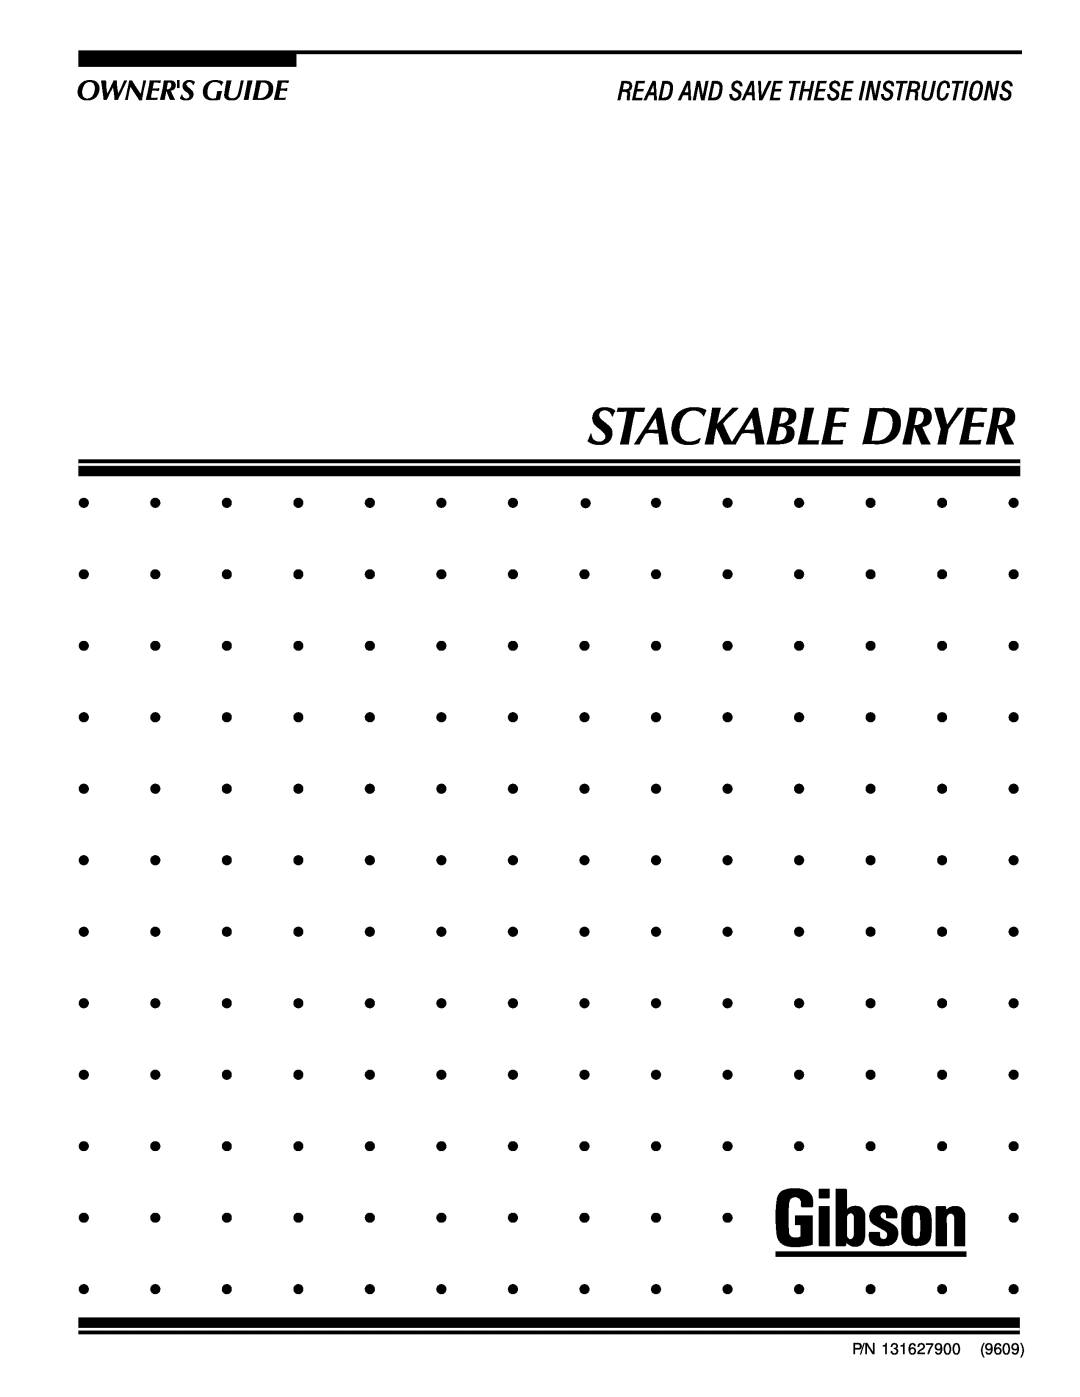 Electrolux - Gibson Stackable Dryer manual P/N 131627900 